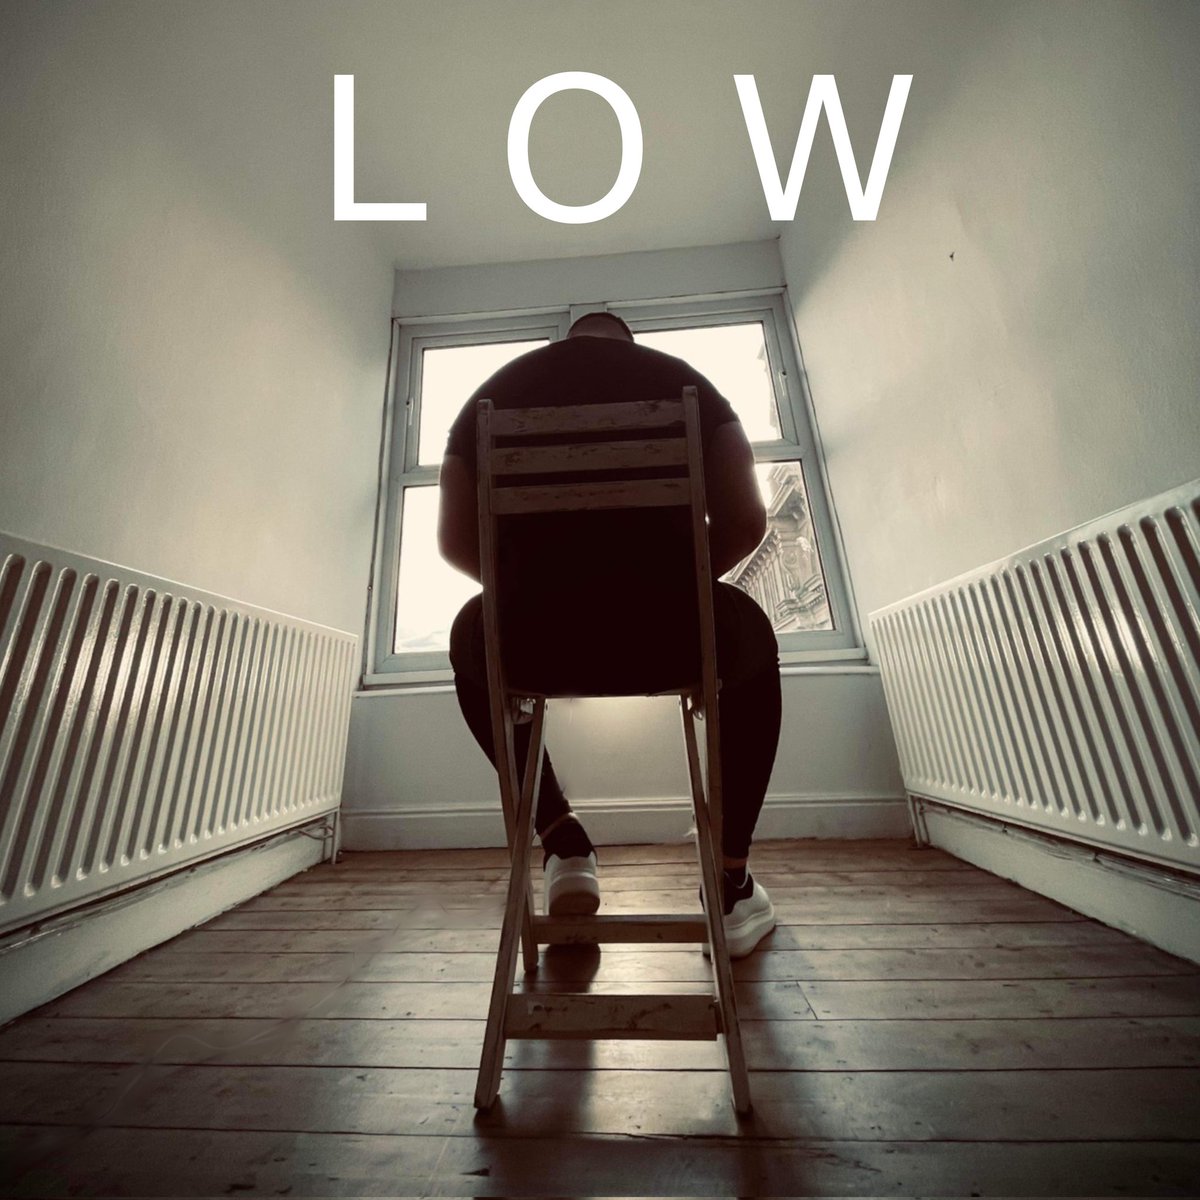 Low is officially out now on all streaming platforms! Hope you enjoy it, make sure to share and tell your friends! Spotify open.spotify.com/track/0IEs1ywk… Apple Music music.apple.com/gb/album/low-s… YouTube youtu.be/NEMPpiISPVQ #altrock #music #spotify #AppleMusic #newmusicfriday #tonowhere